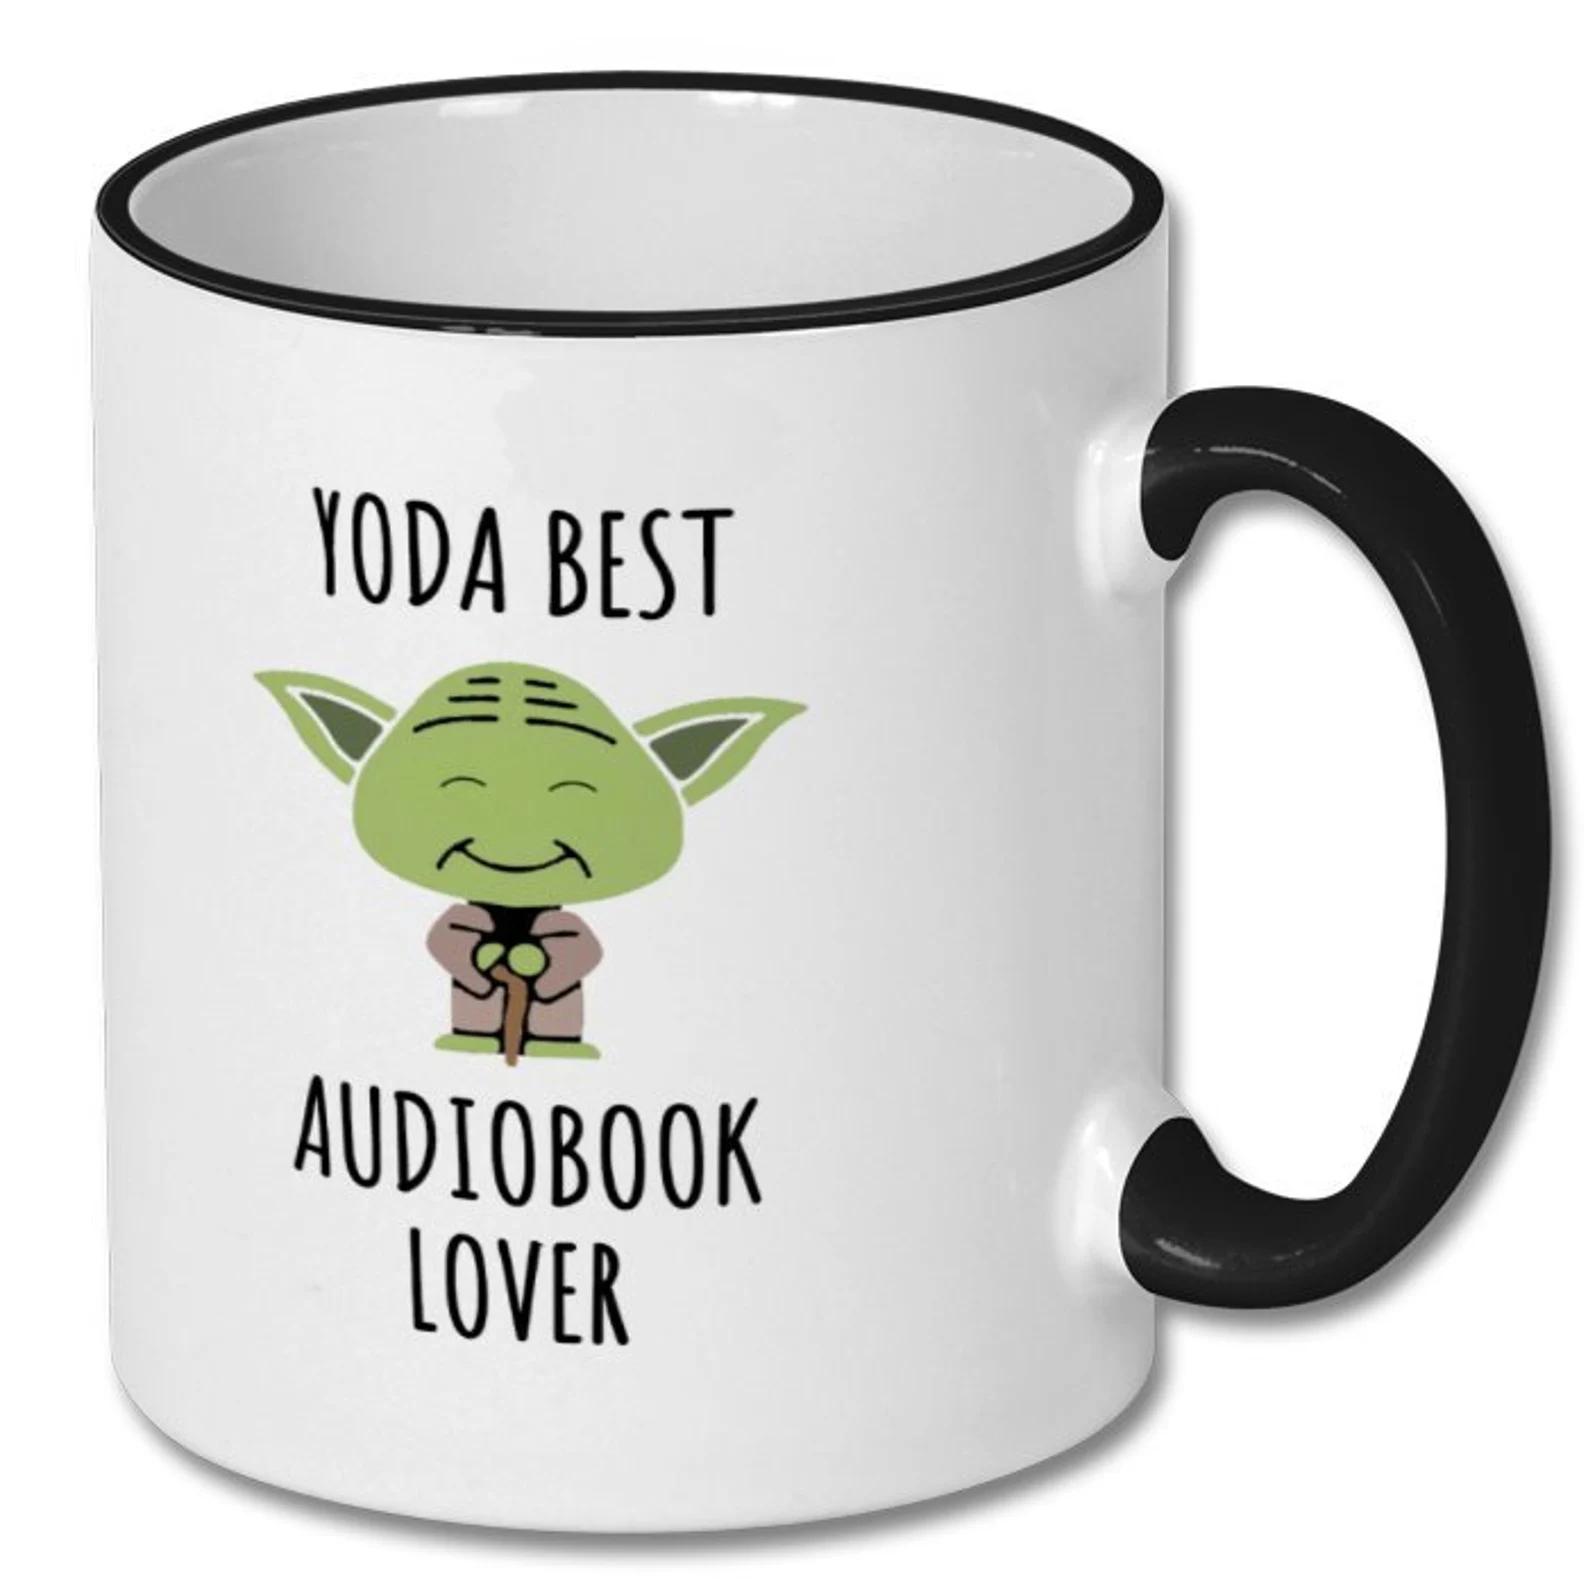 mug that reads yoda best audiobook lover with a picture of yoda on it